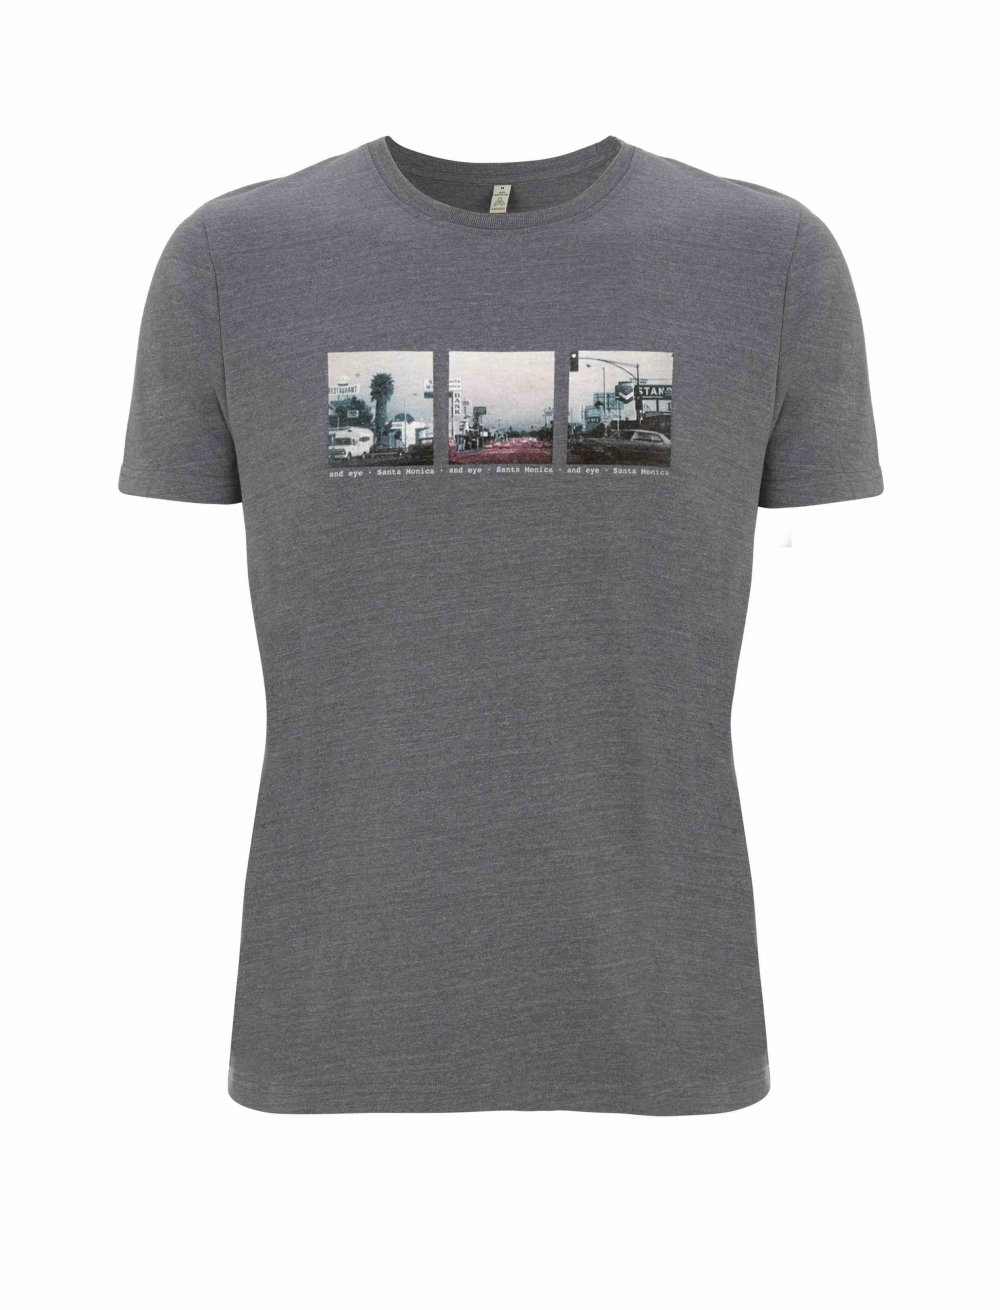 Recycled classic t-shirt with a vintage image of Santa Monica